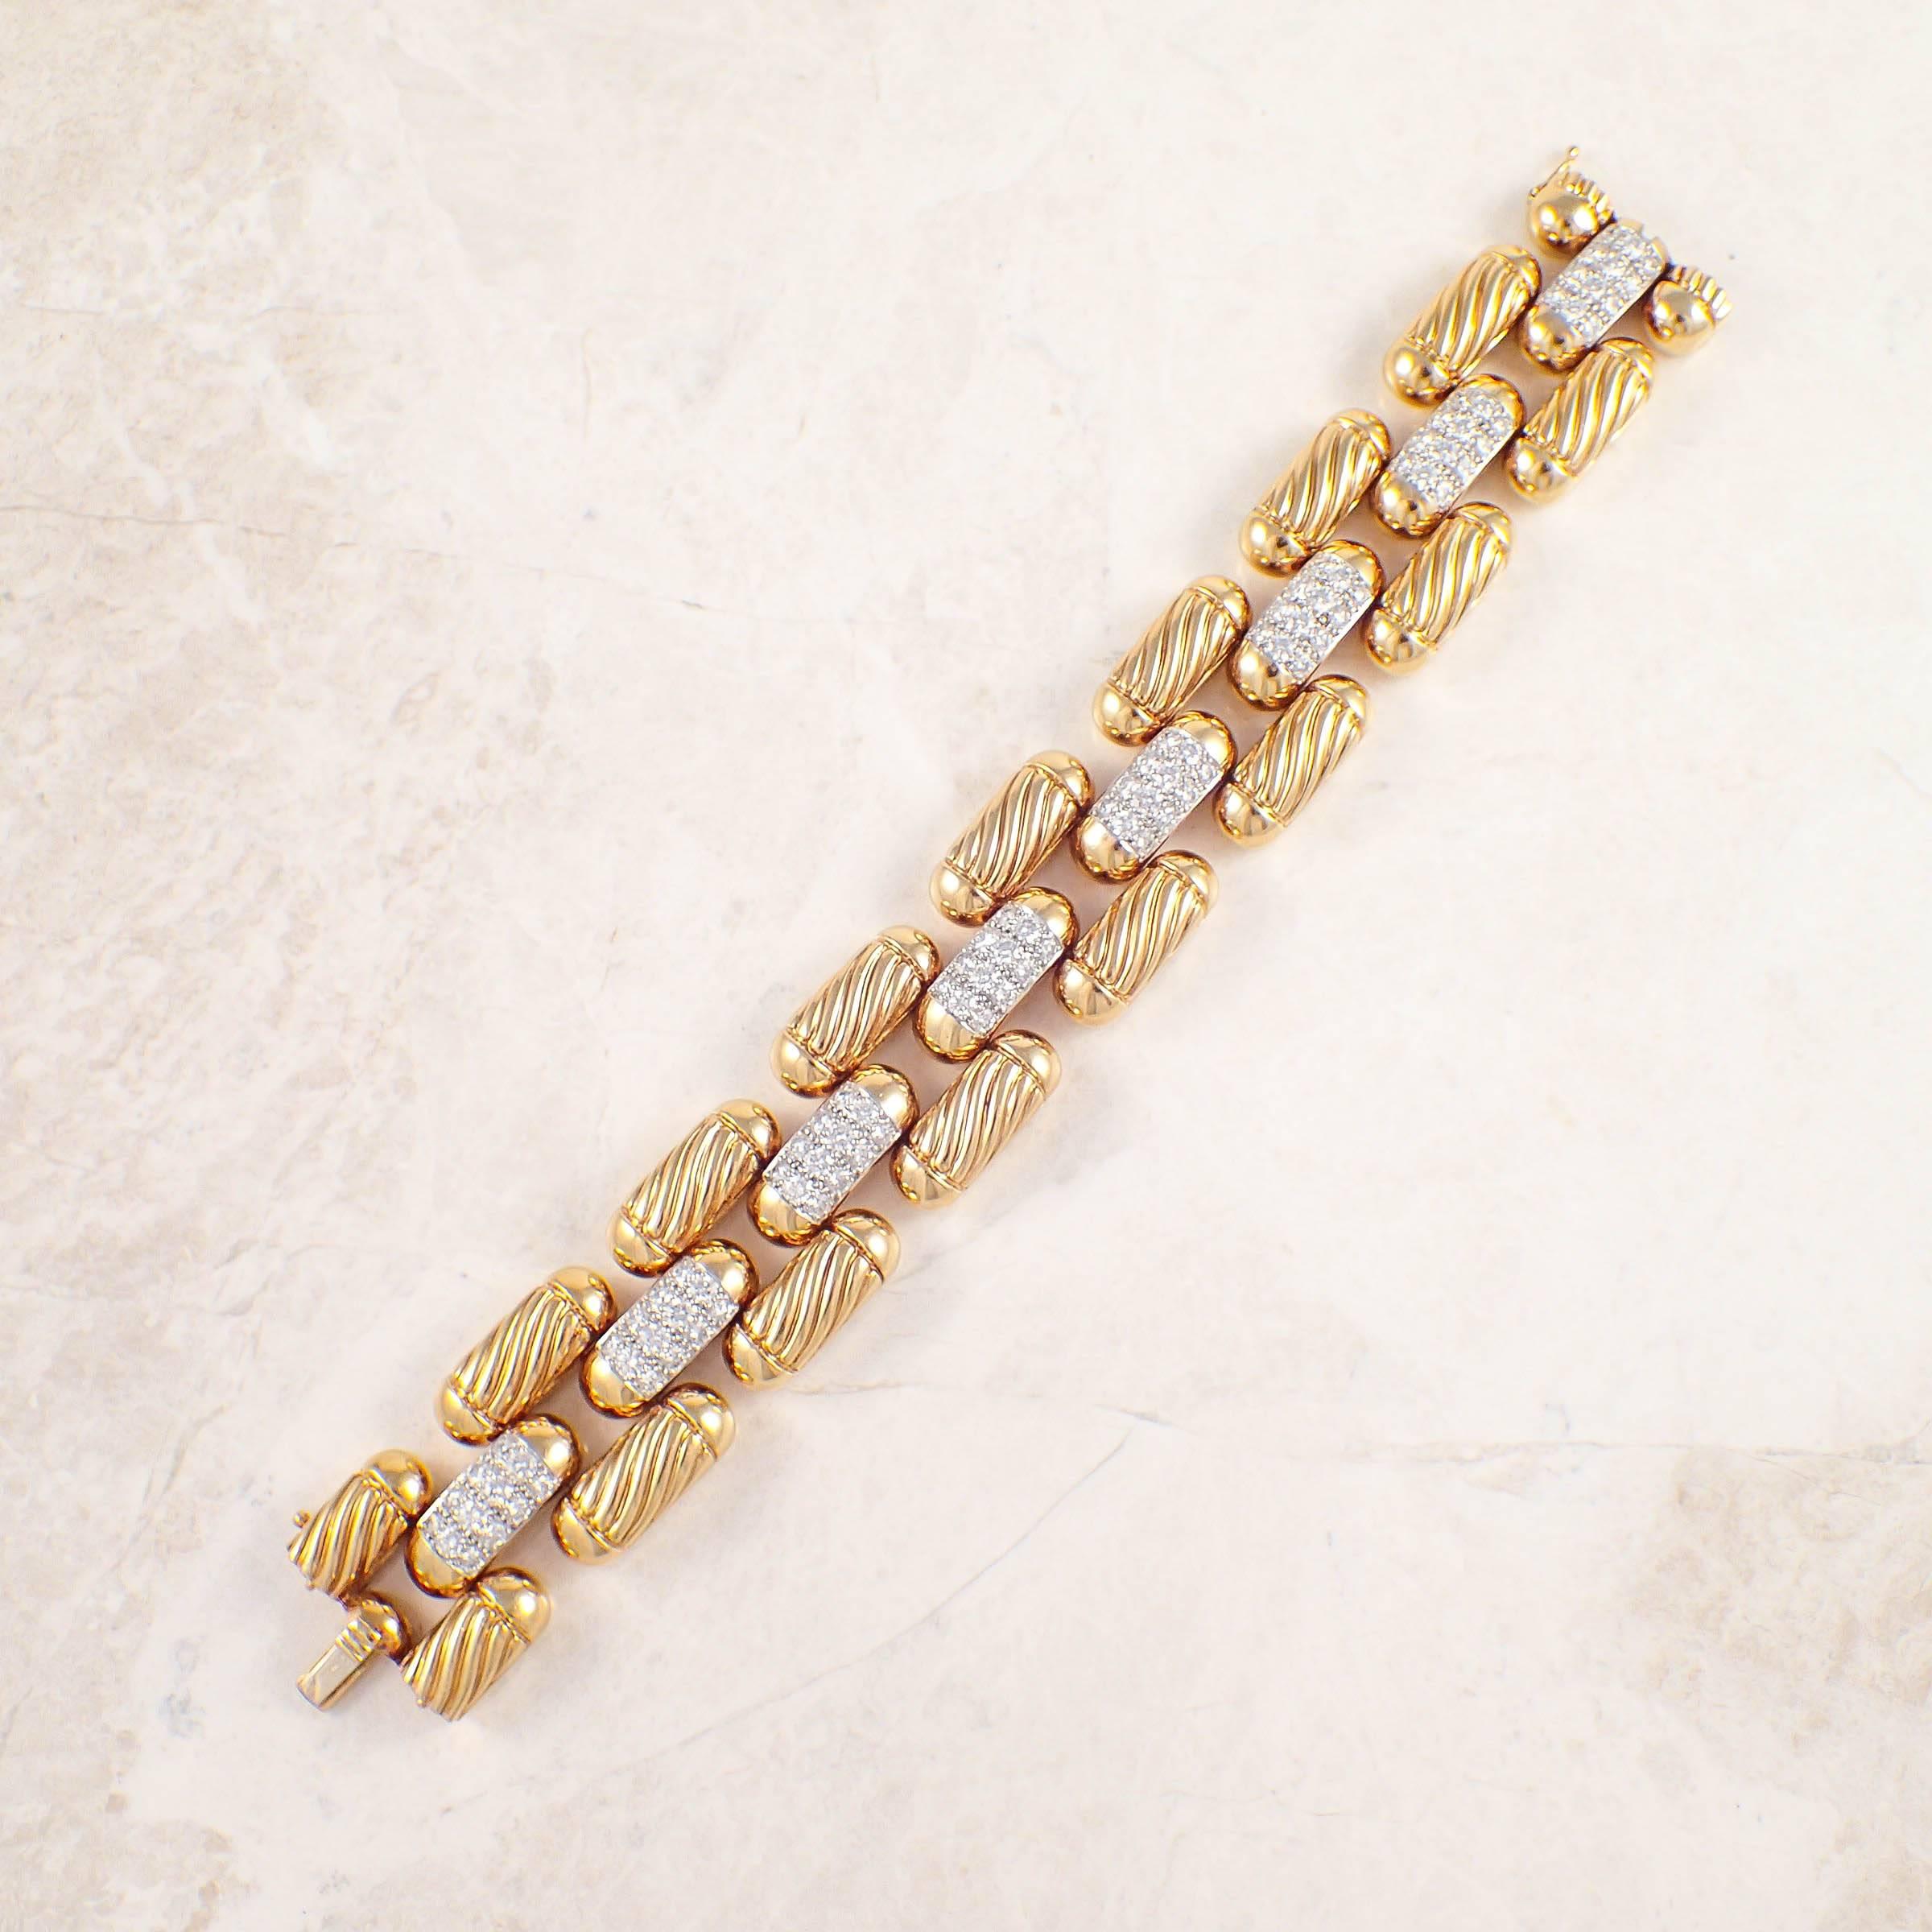 18K Yellow gold diamond bracelet. The panther style links each measure 1 inch wide, and are set with 96 round diamonds weighing approximately 6.75 carats total. The bracelet measures 7 1/2 inches long and weighs 73.2 DWTs/ 113.8 grams.  

Color: